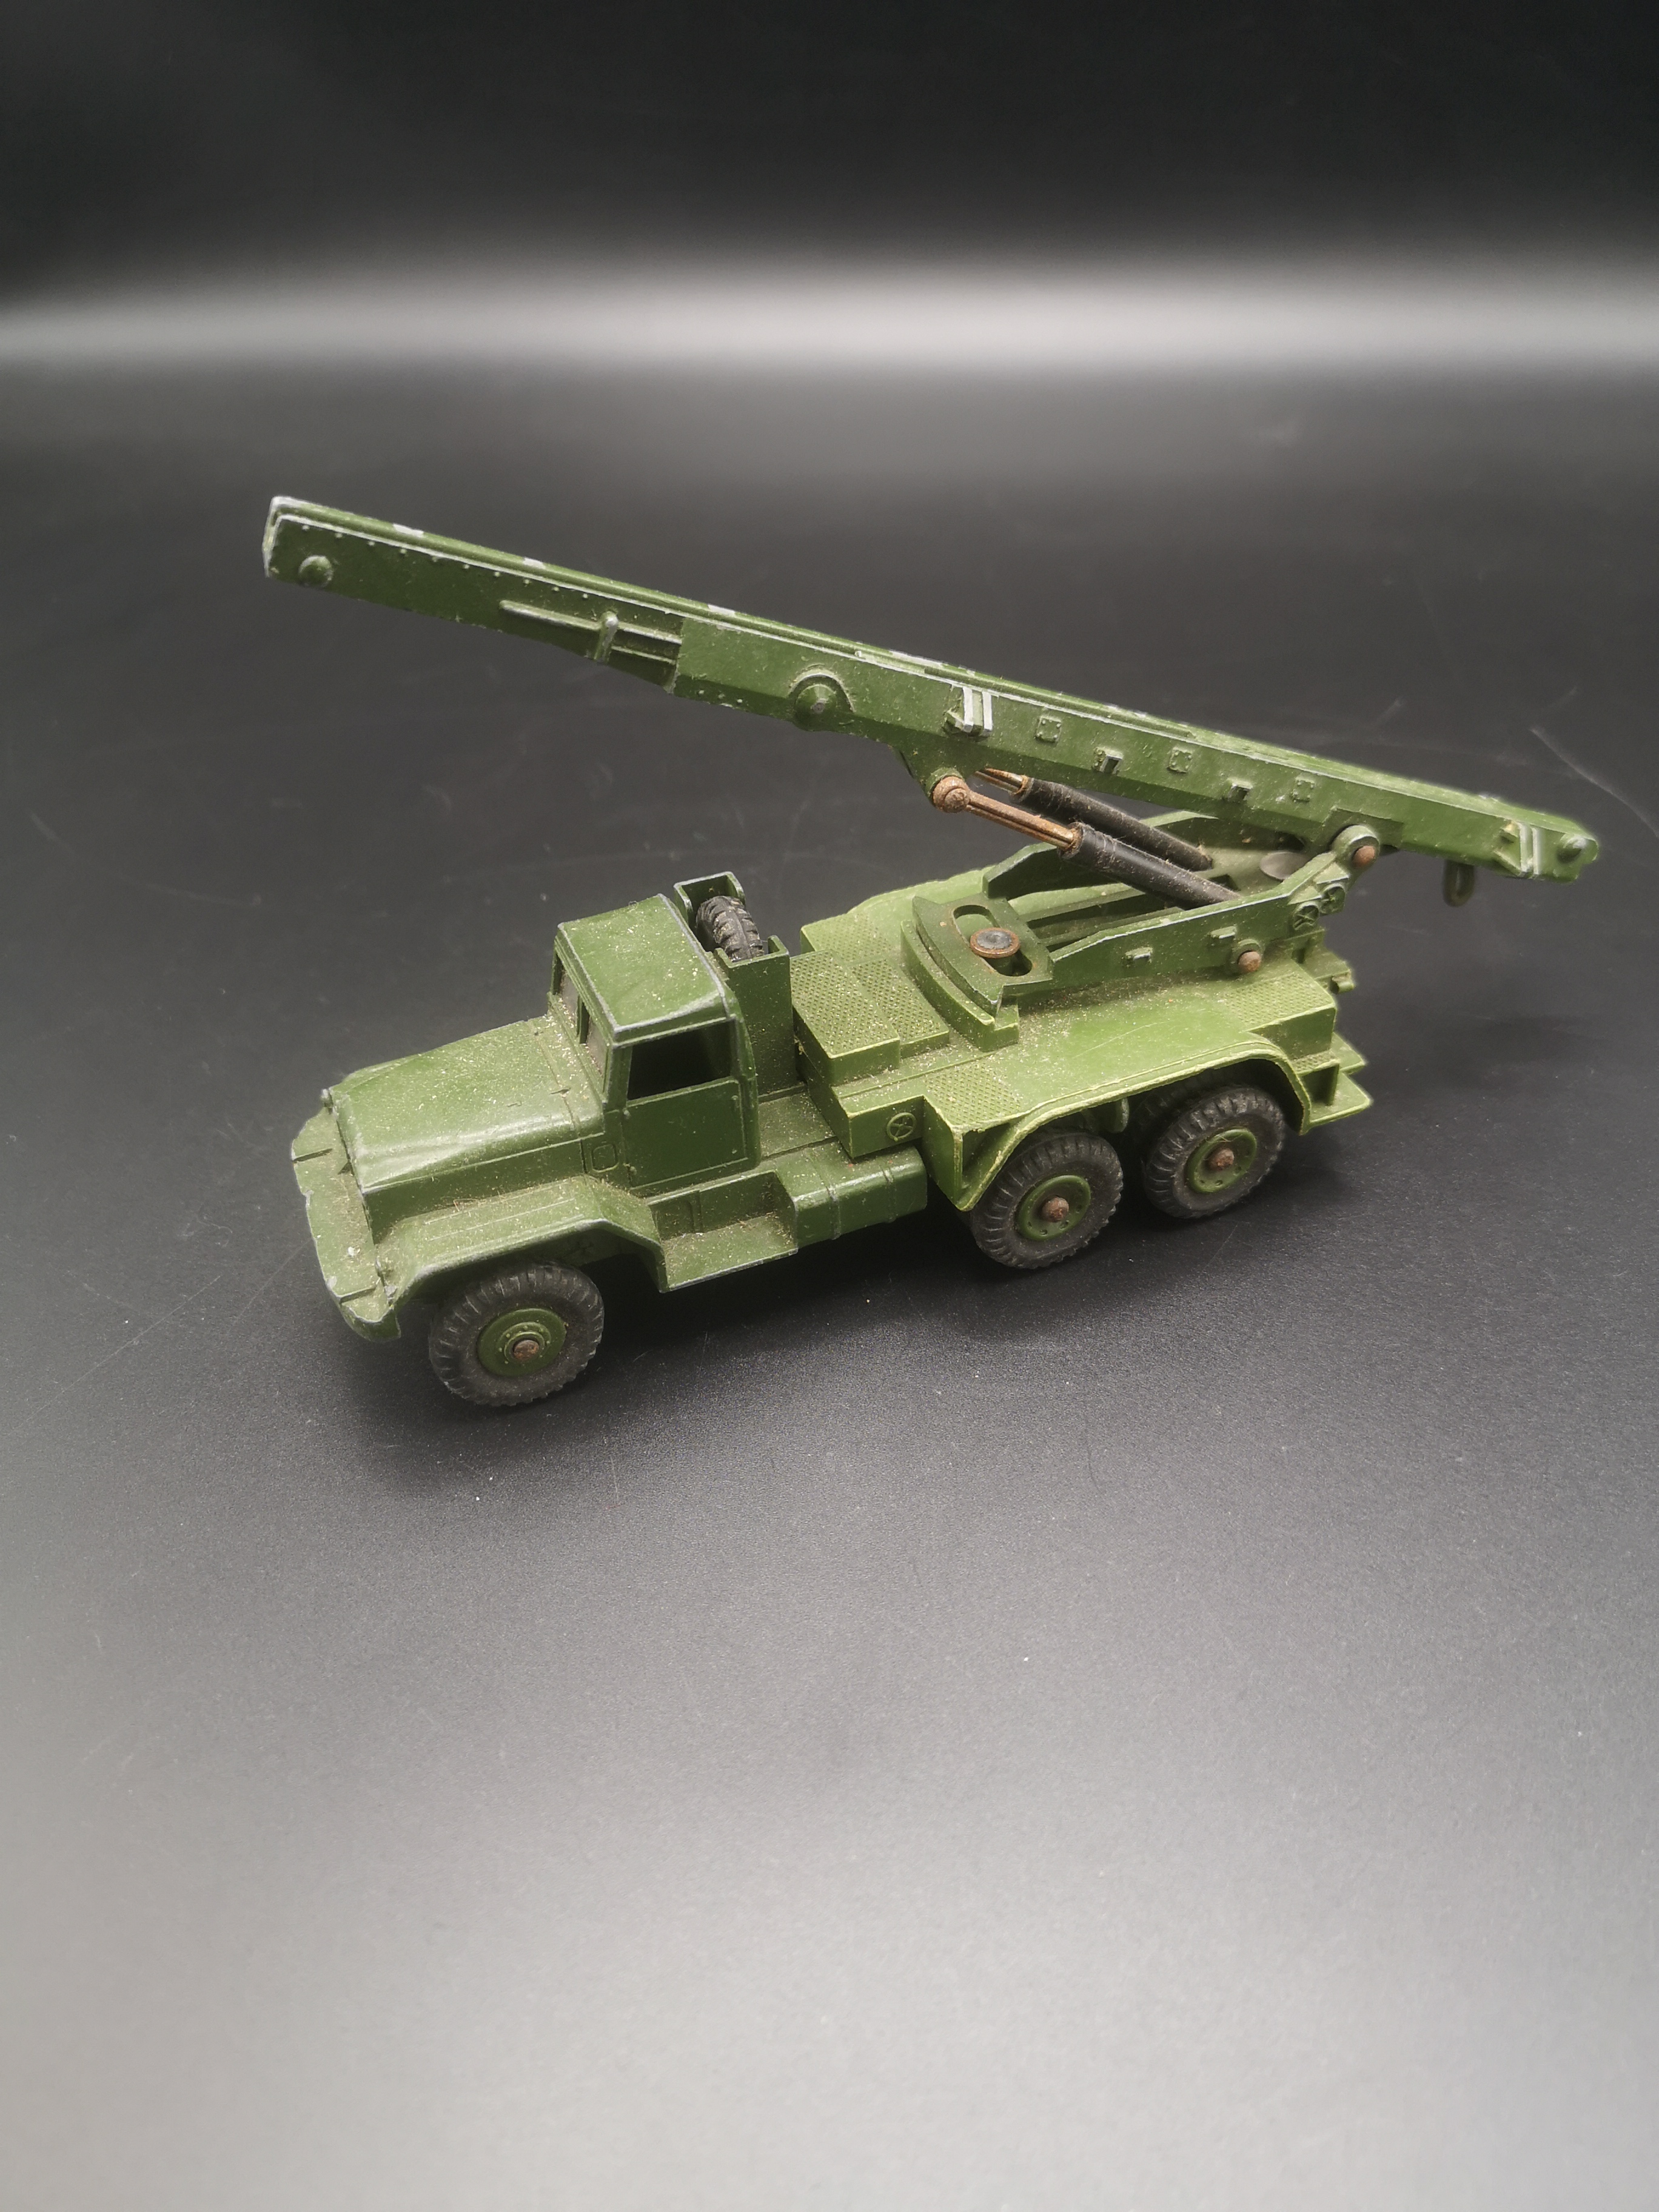 A Crescent diecast model tank together with a Dinky die-cast model missile launcher - Image 7 of 8